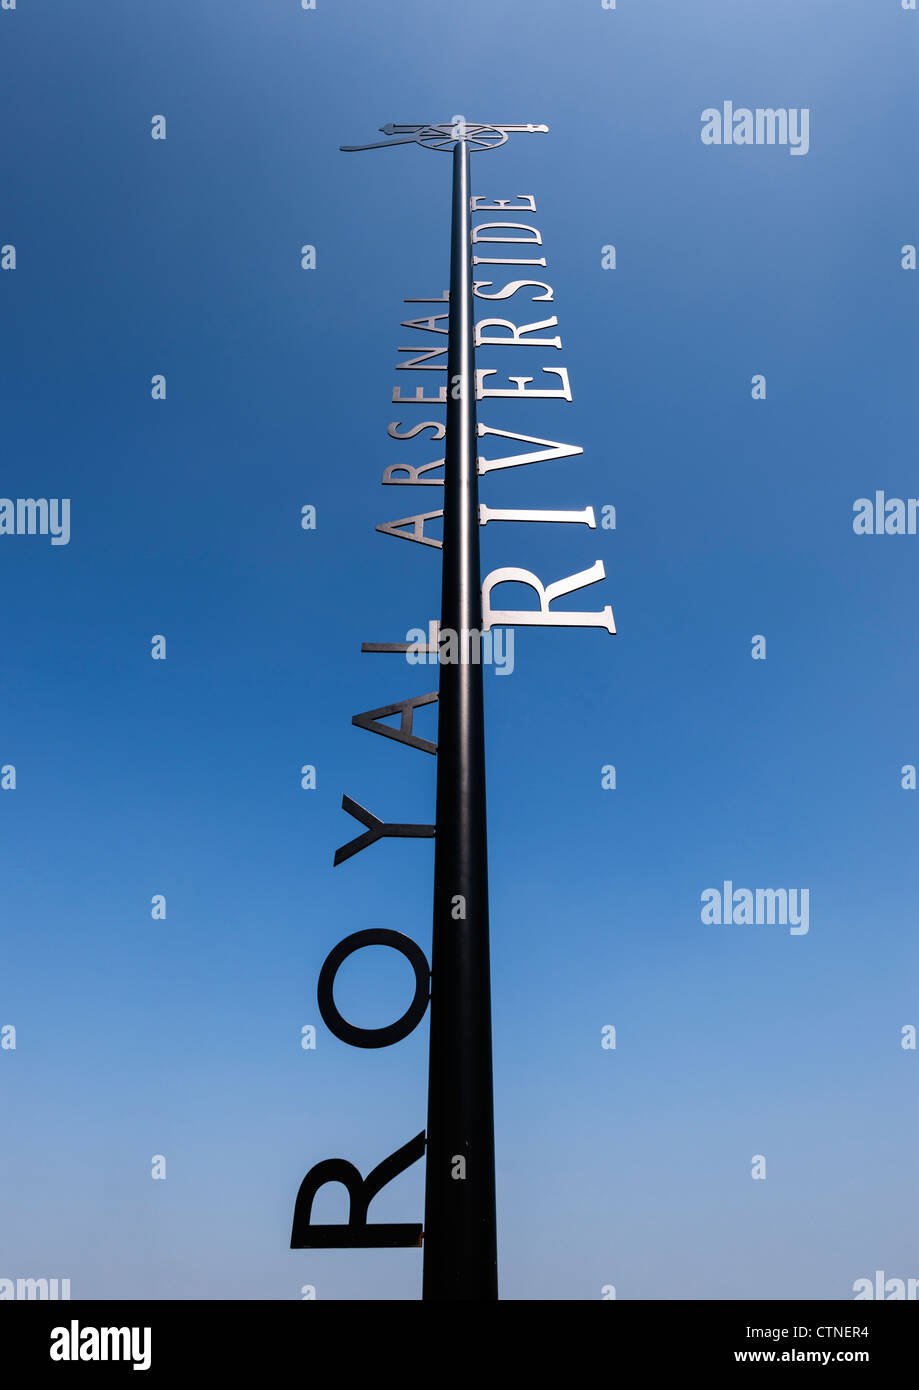 Signpost for the Royal Arsenal Riverside complex in Woolwich Arsenal, Greenwich, London, England, United Kingdom. Stock Photo